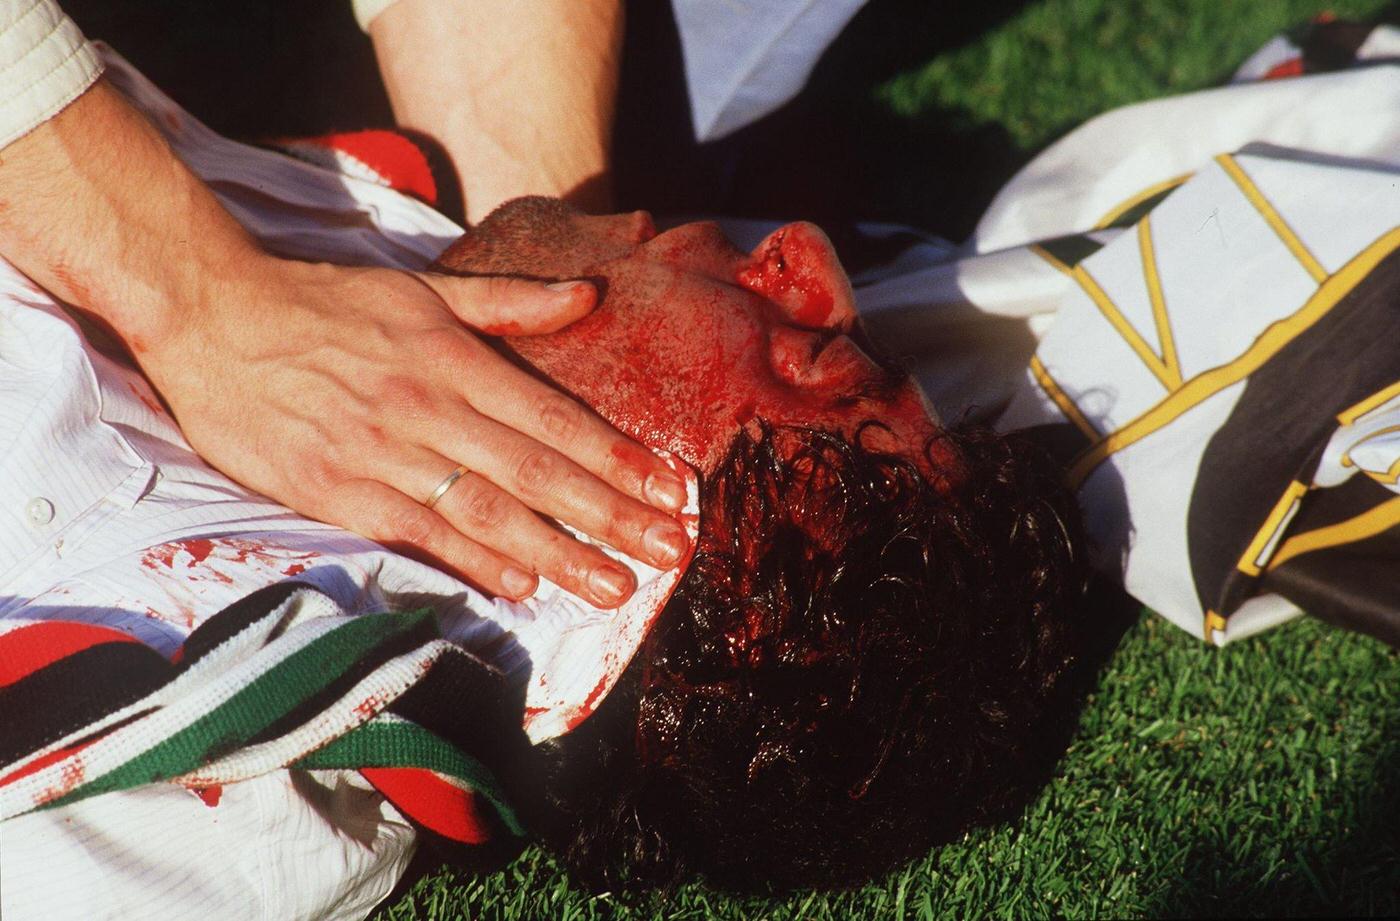 Victim of Heysel Stadium disaster crushed by fallen wall, European Cup Final, 1985.